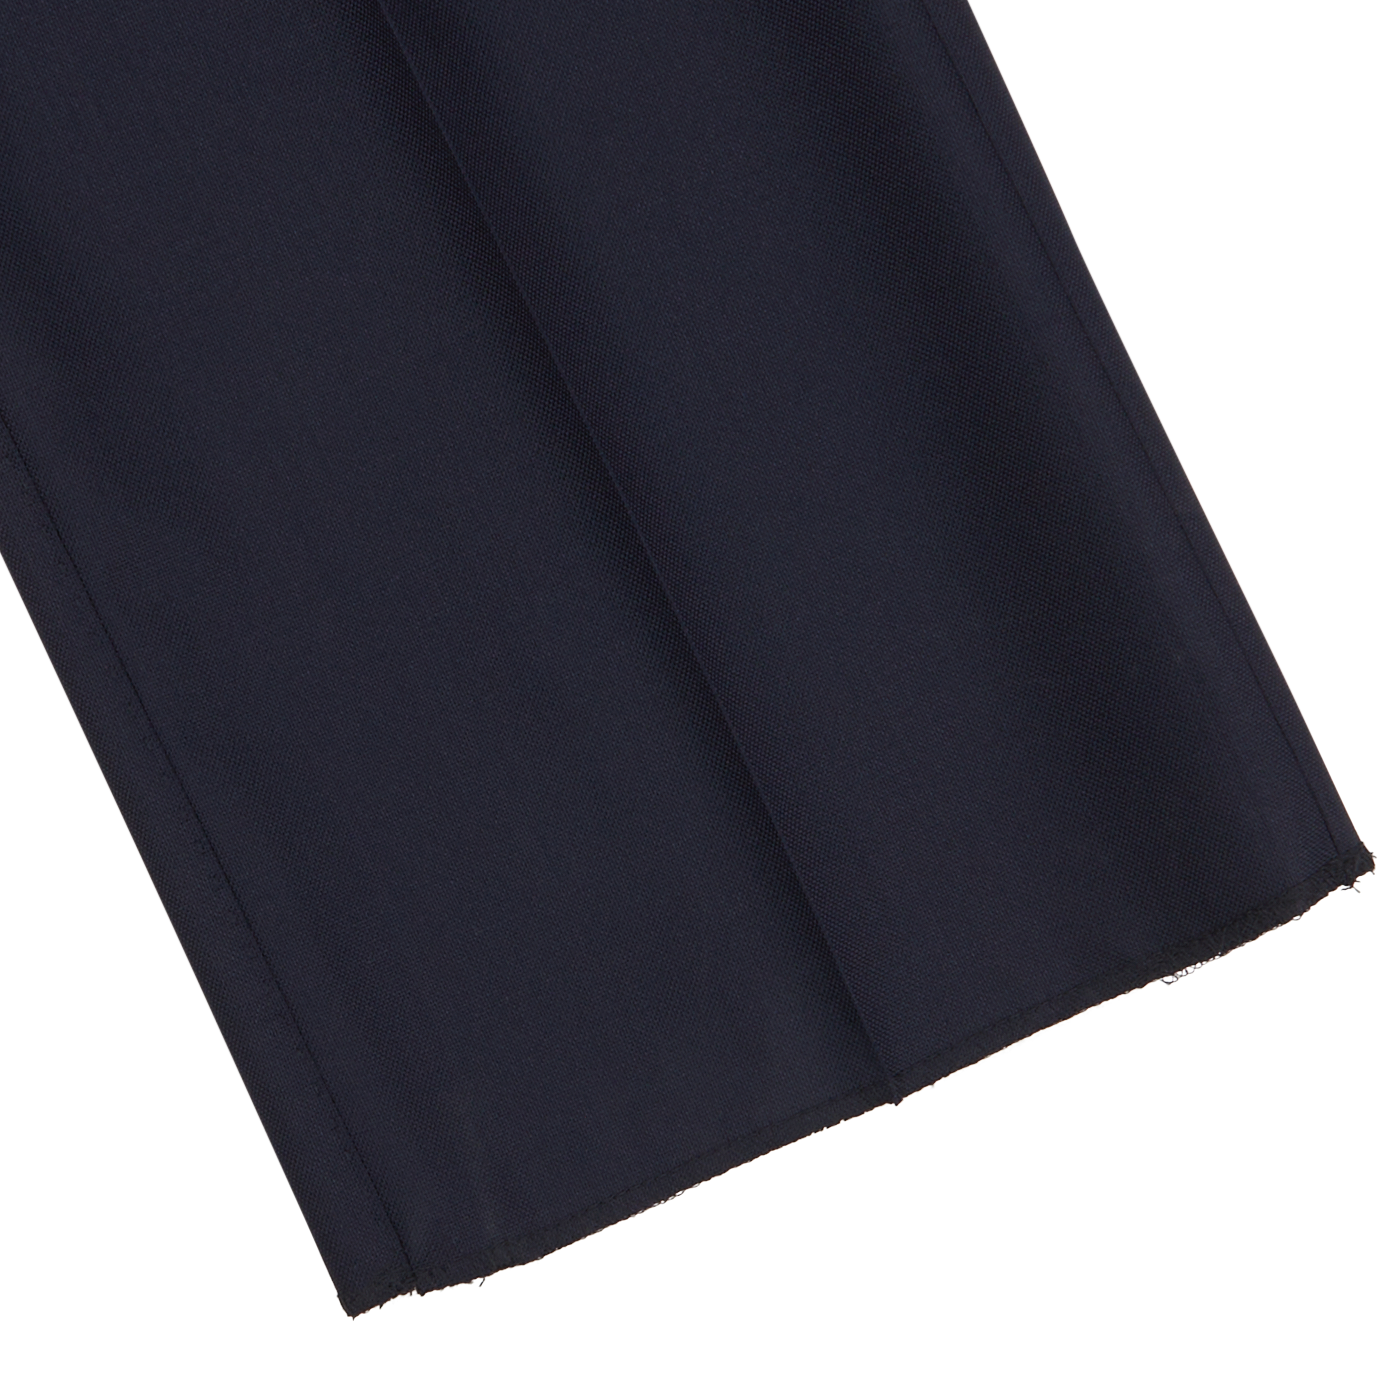 Close-up of Baltzar Sartorial Navy Super 100's Wool Pleated Suit Trousers fabric with a visible weave, highlighting the hem and unfinished edge against a white background.